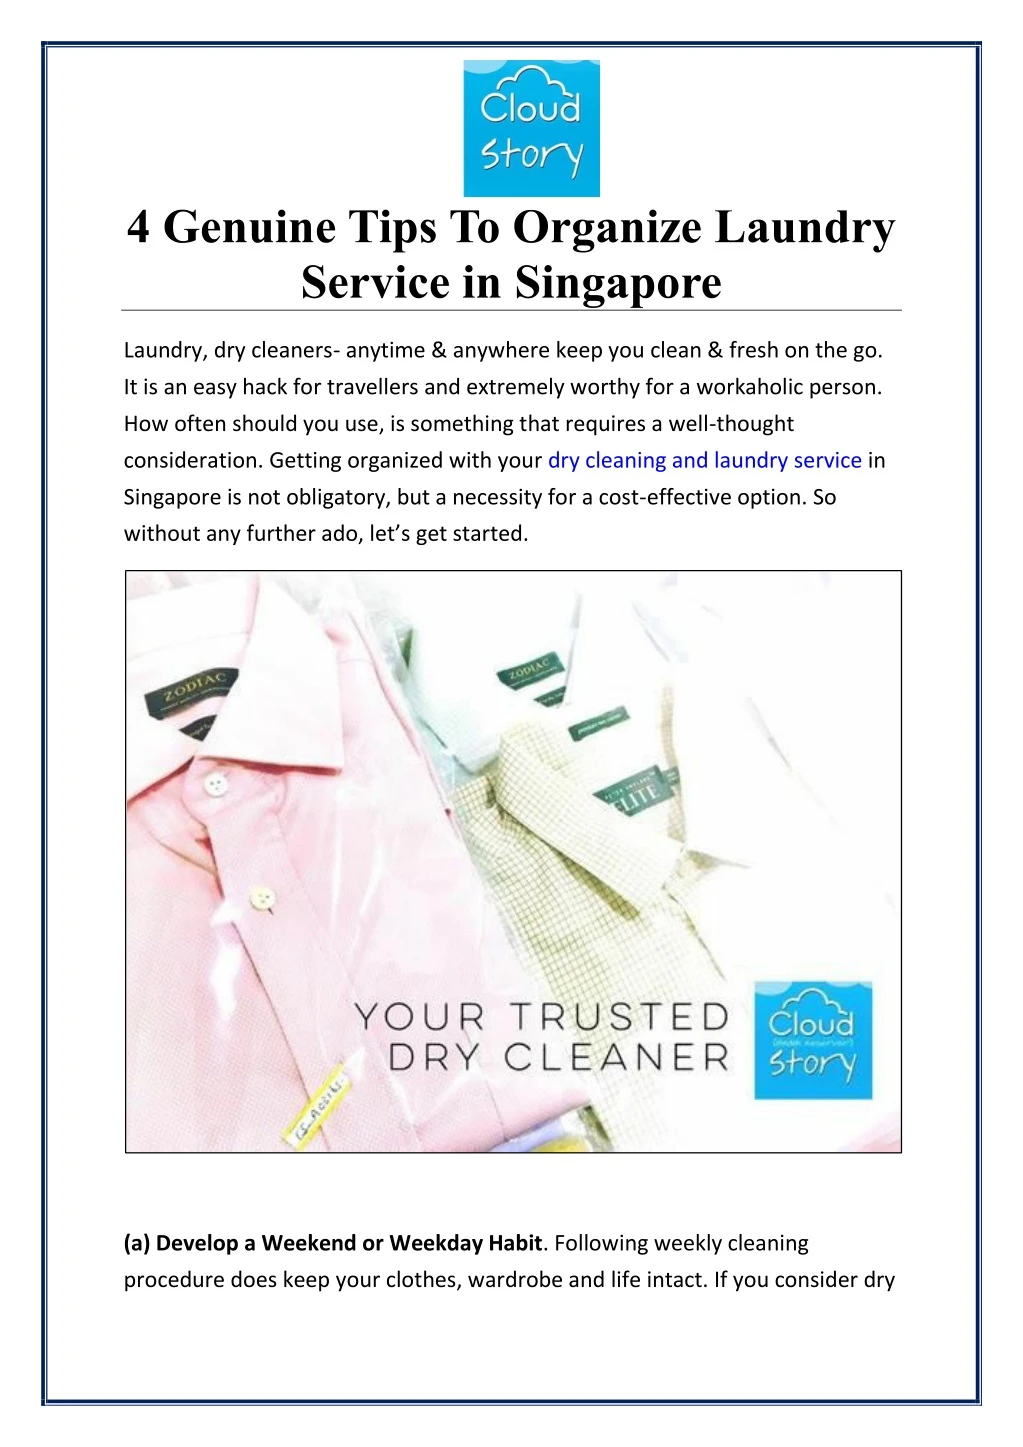 4 genuine tips to organize laundry service